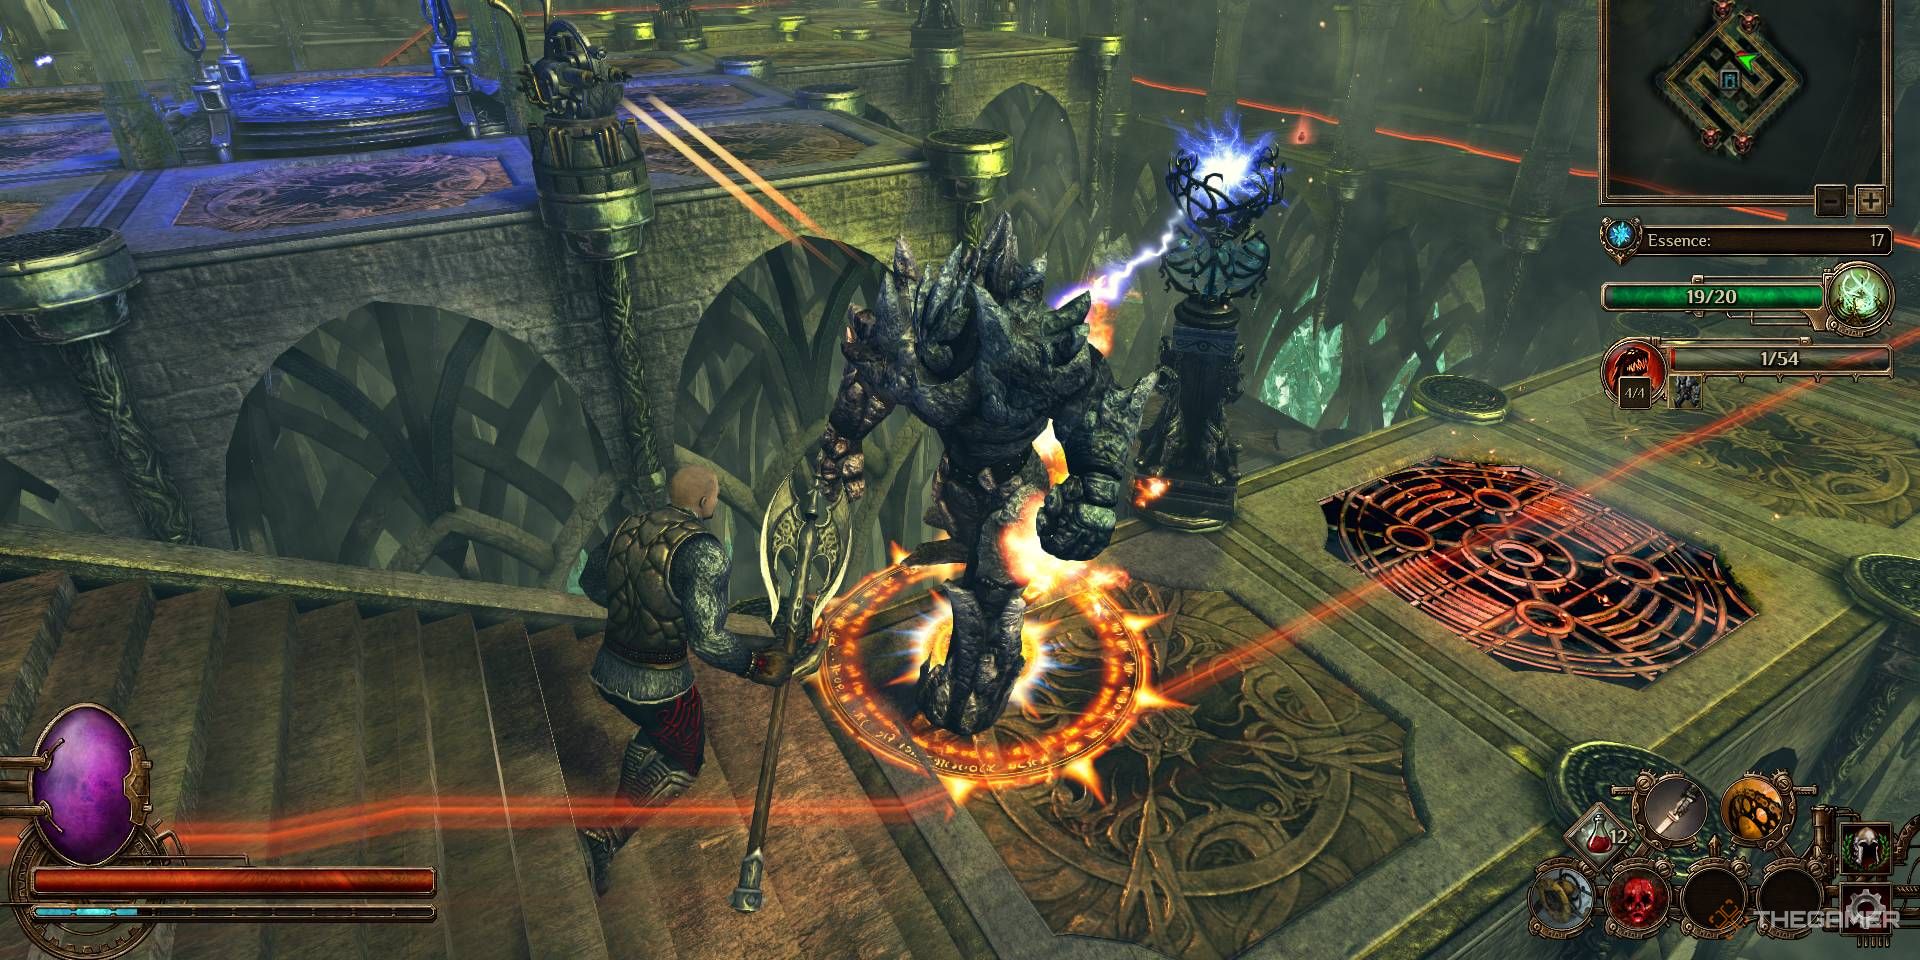 Image from the Tower Defense game Deathtrap showing multiple towers automatically attacking an enemy